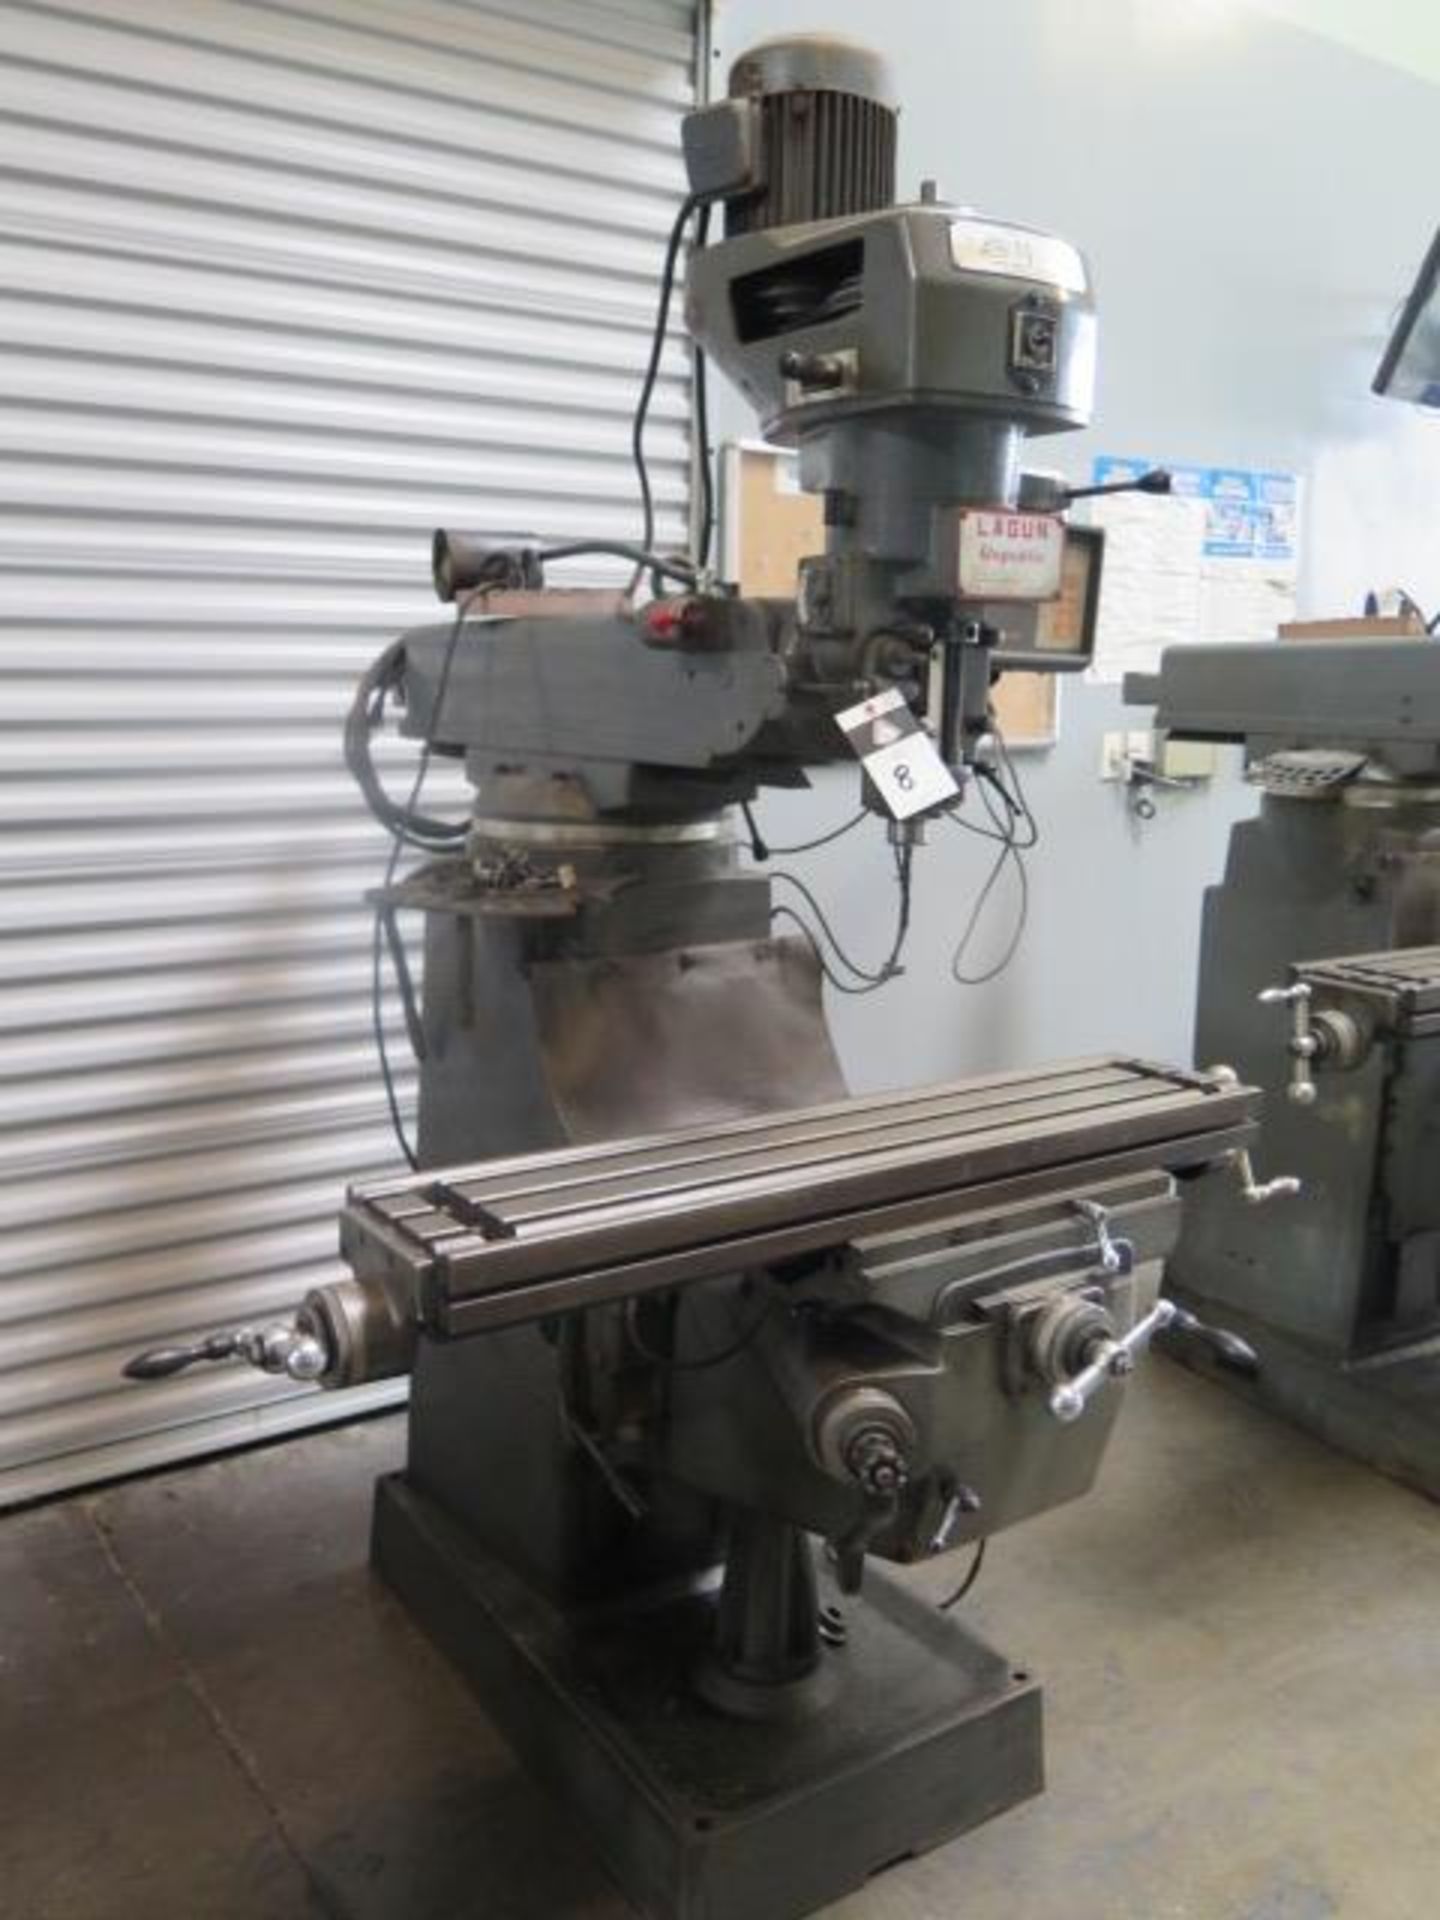 Lagun FT-1 Vertical Mill w/ Anilam Wizard DRO, 55-2940 RPM, 8-Speeds, 9” x 42” Table SOLD AS-IS - Image 3 of 9